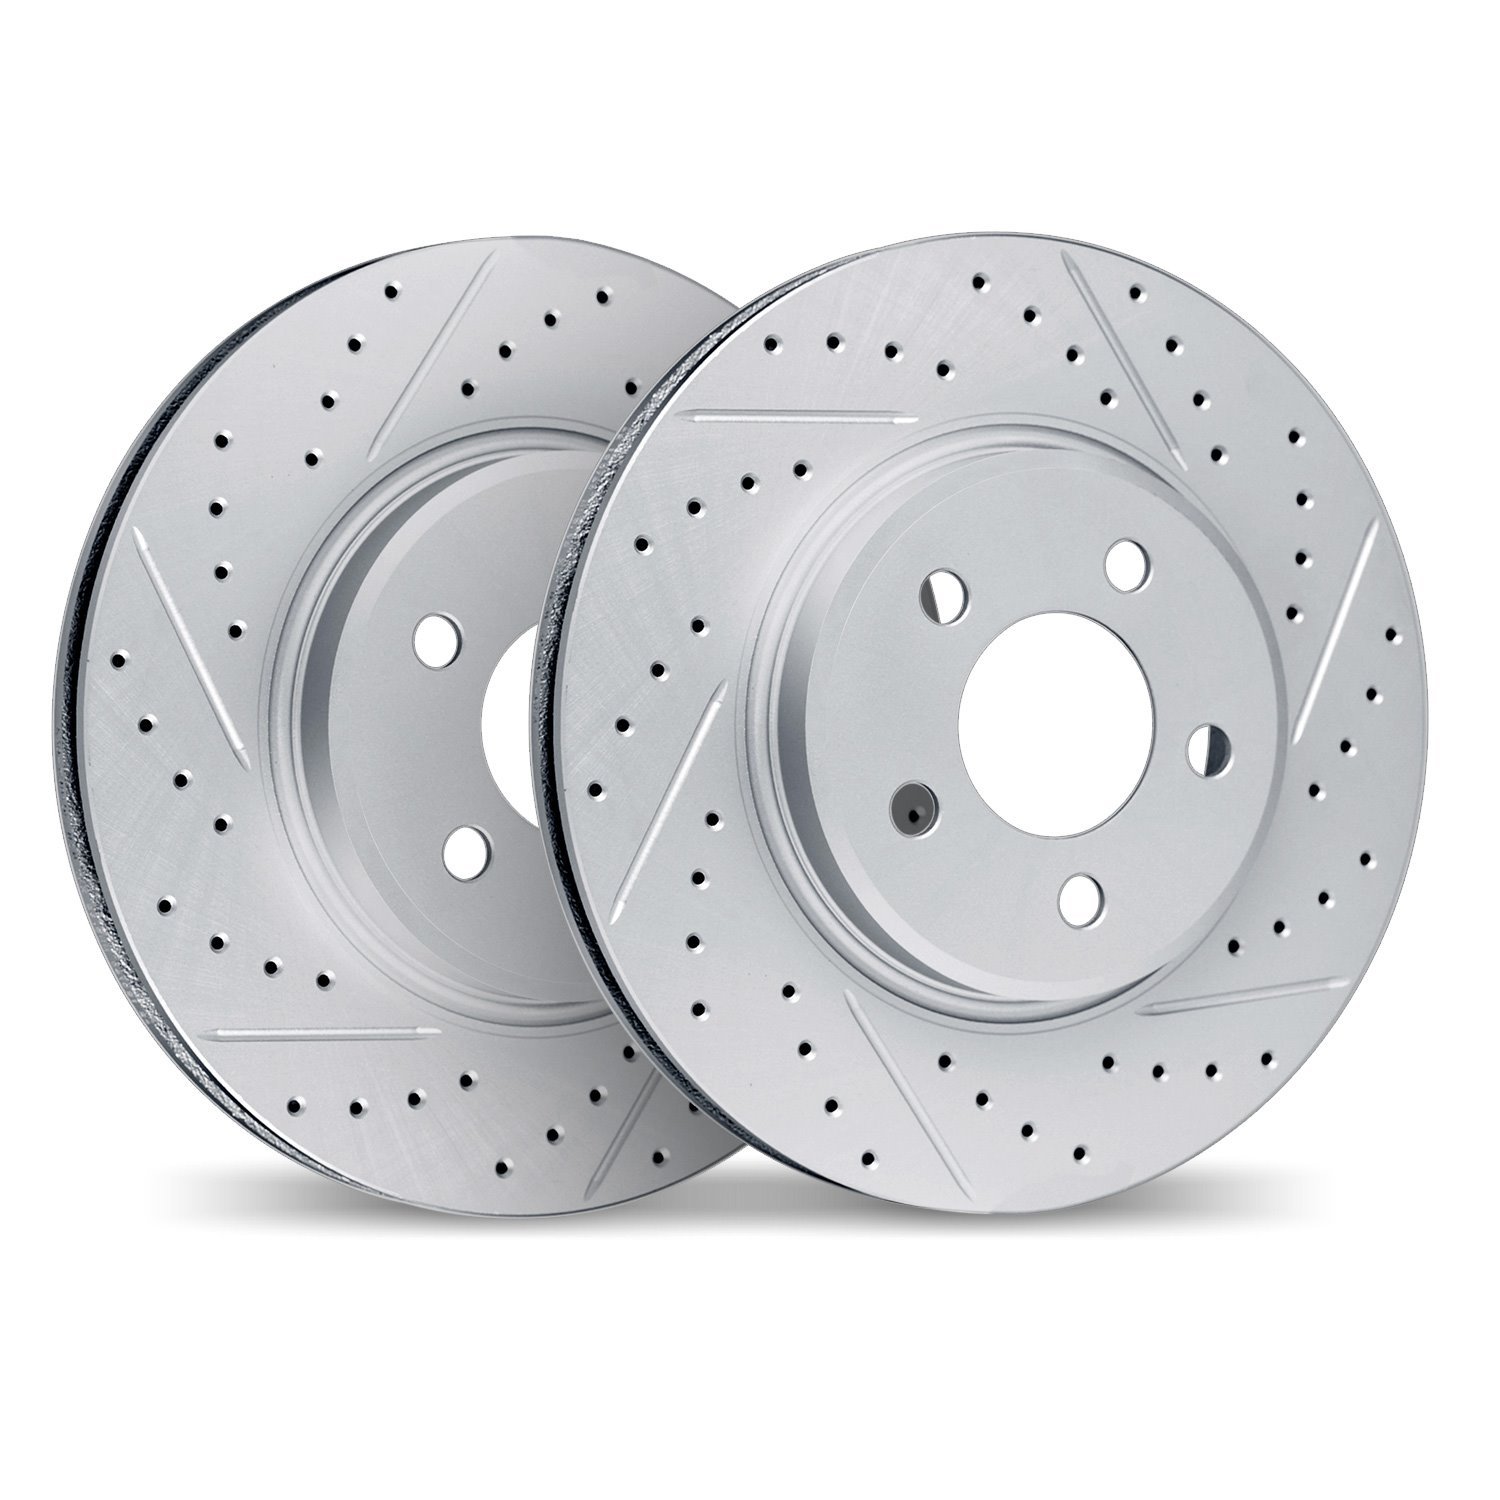 2002-54008 Geoperformance Drilled/Slotted Brake Rotors, 1968-1969 Ford/Lincoln/Mercury/Mazda, Position: Front